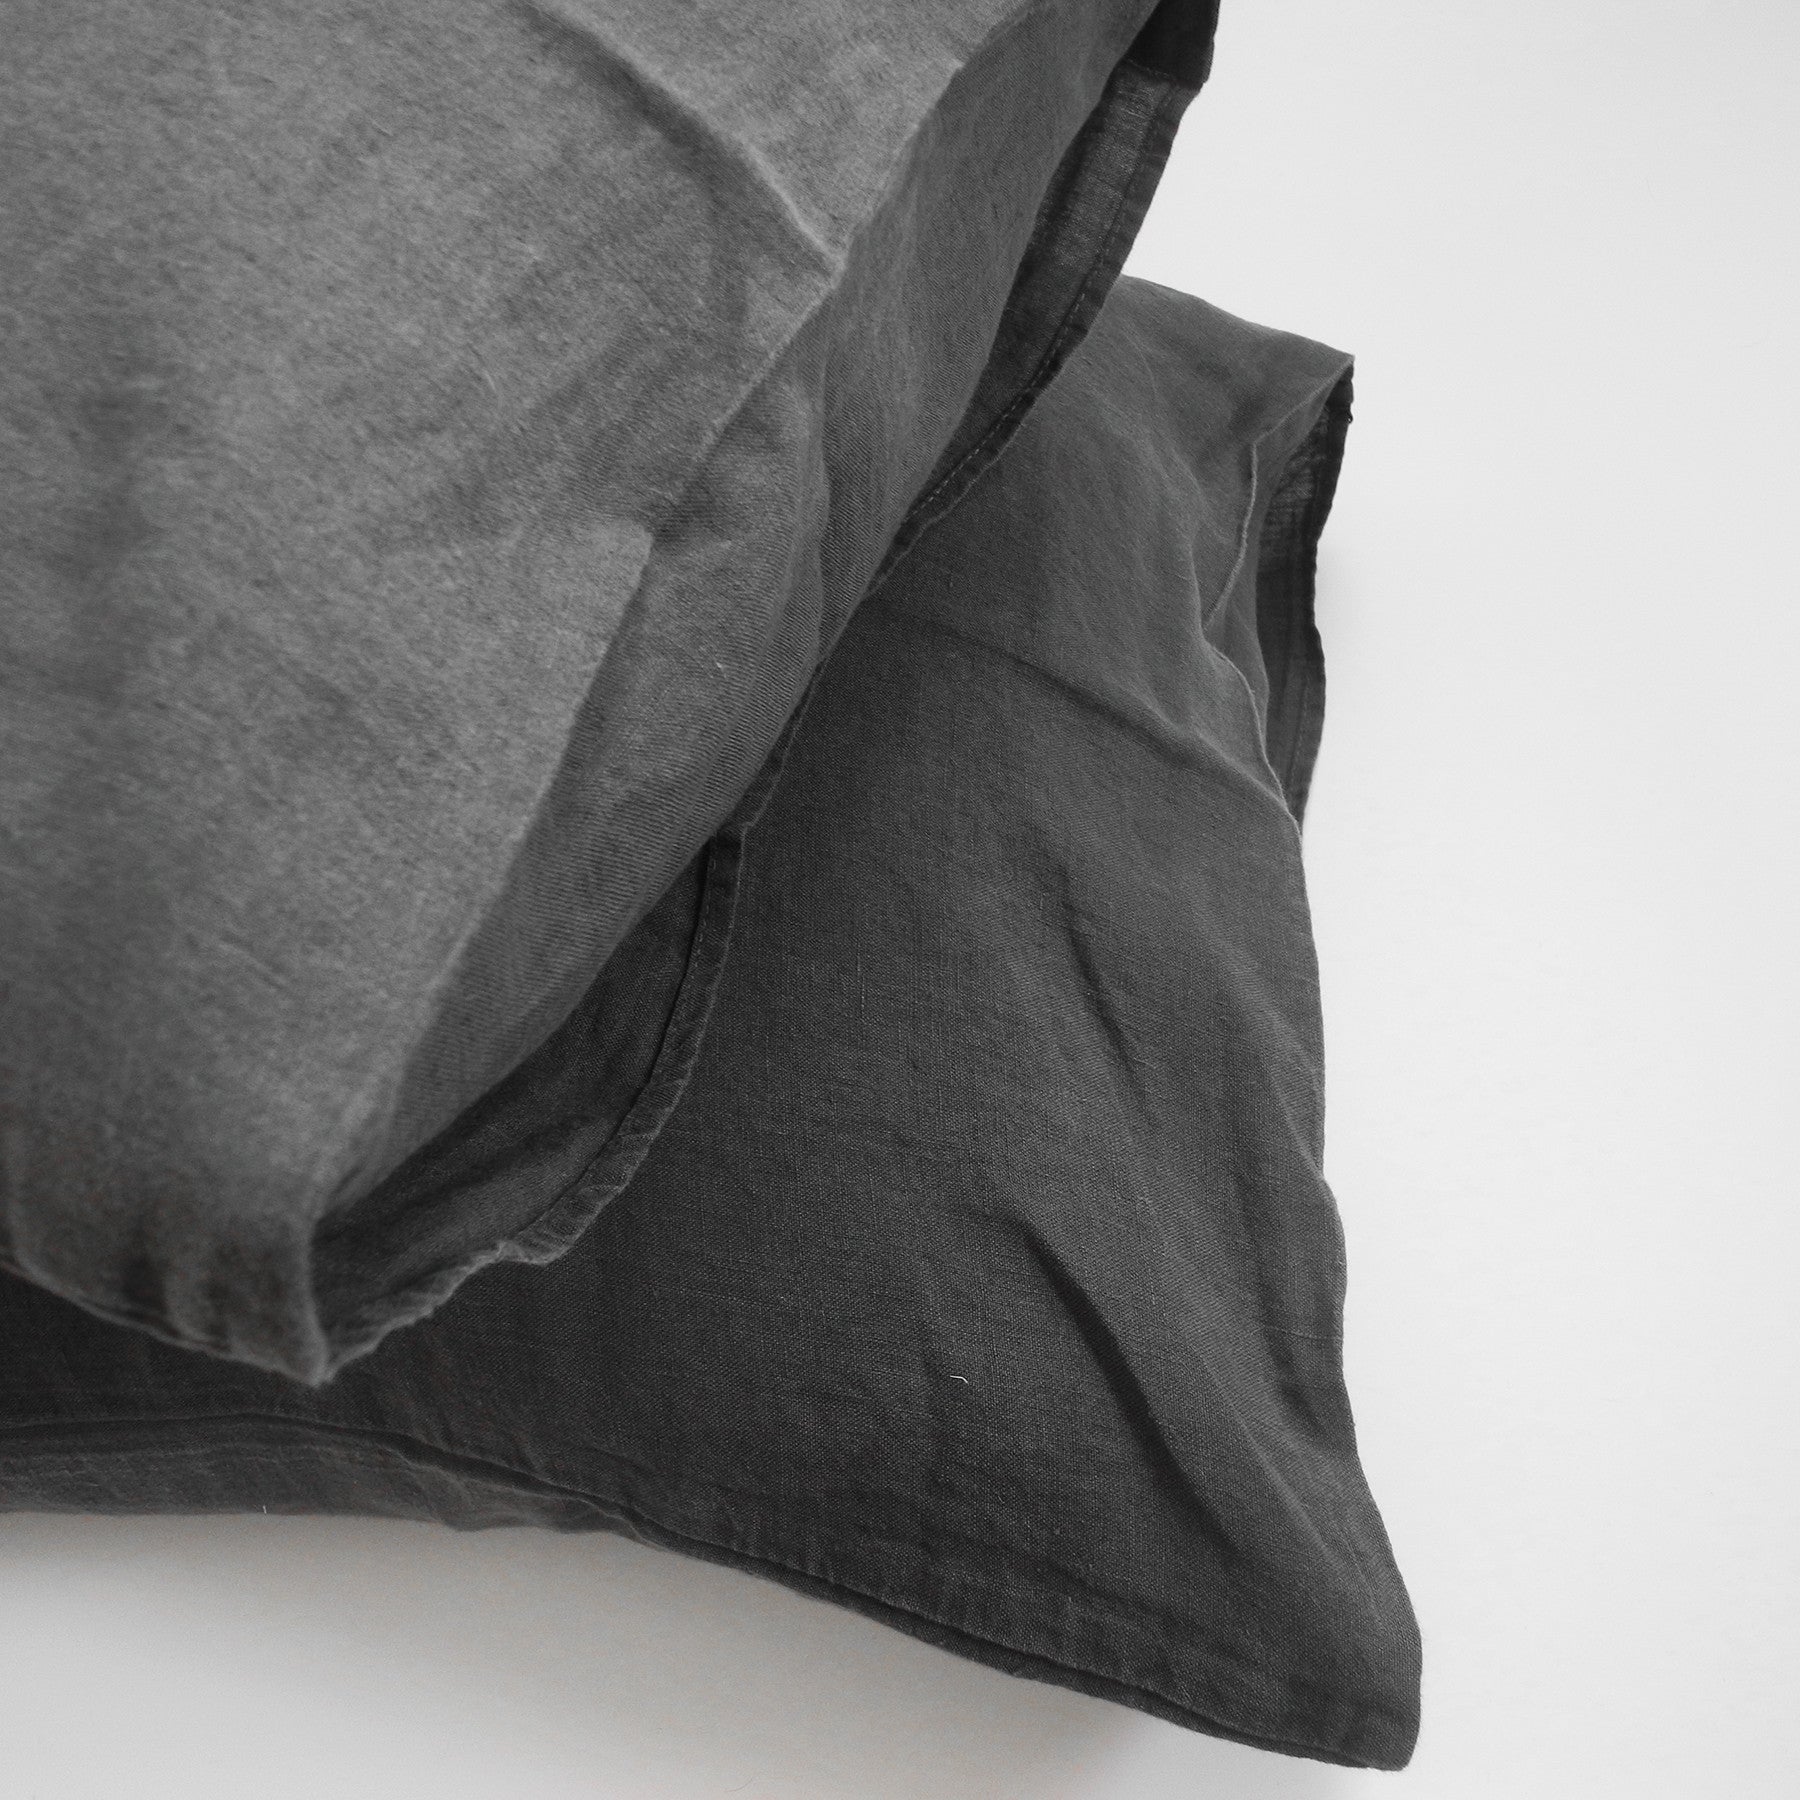 Linge Particulier Storm Grey Standard Linen Pillowcase Sham for a colorful linen bedding look in charcoal grey - Collyer&#39;s Mansion